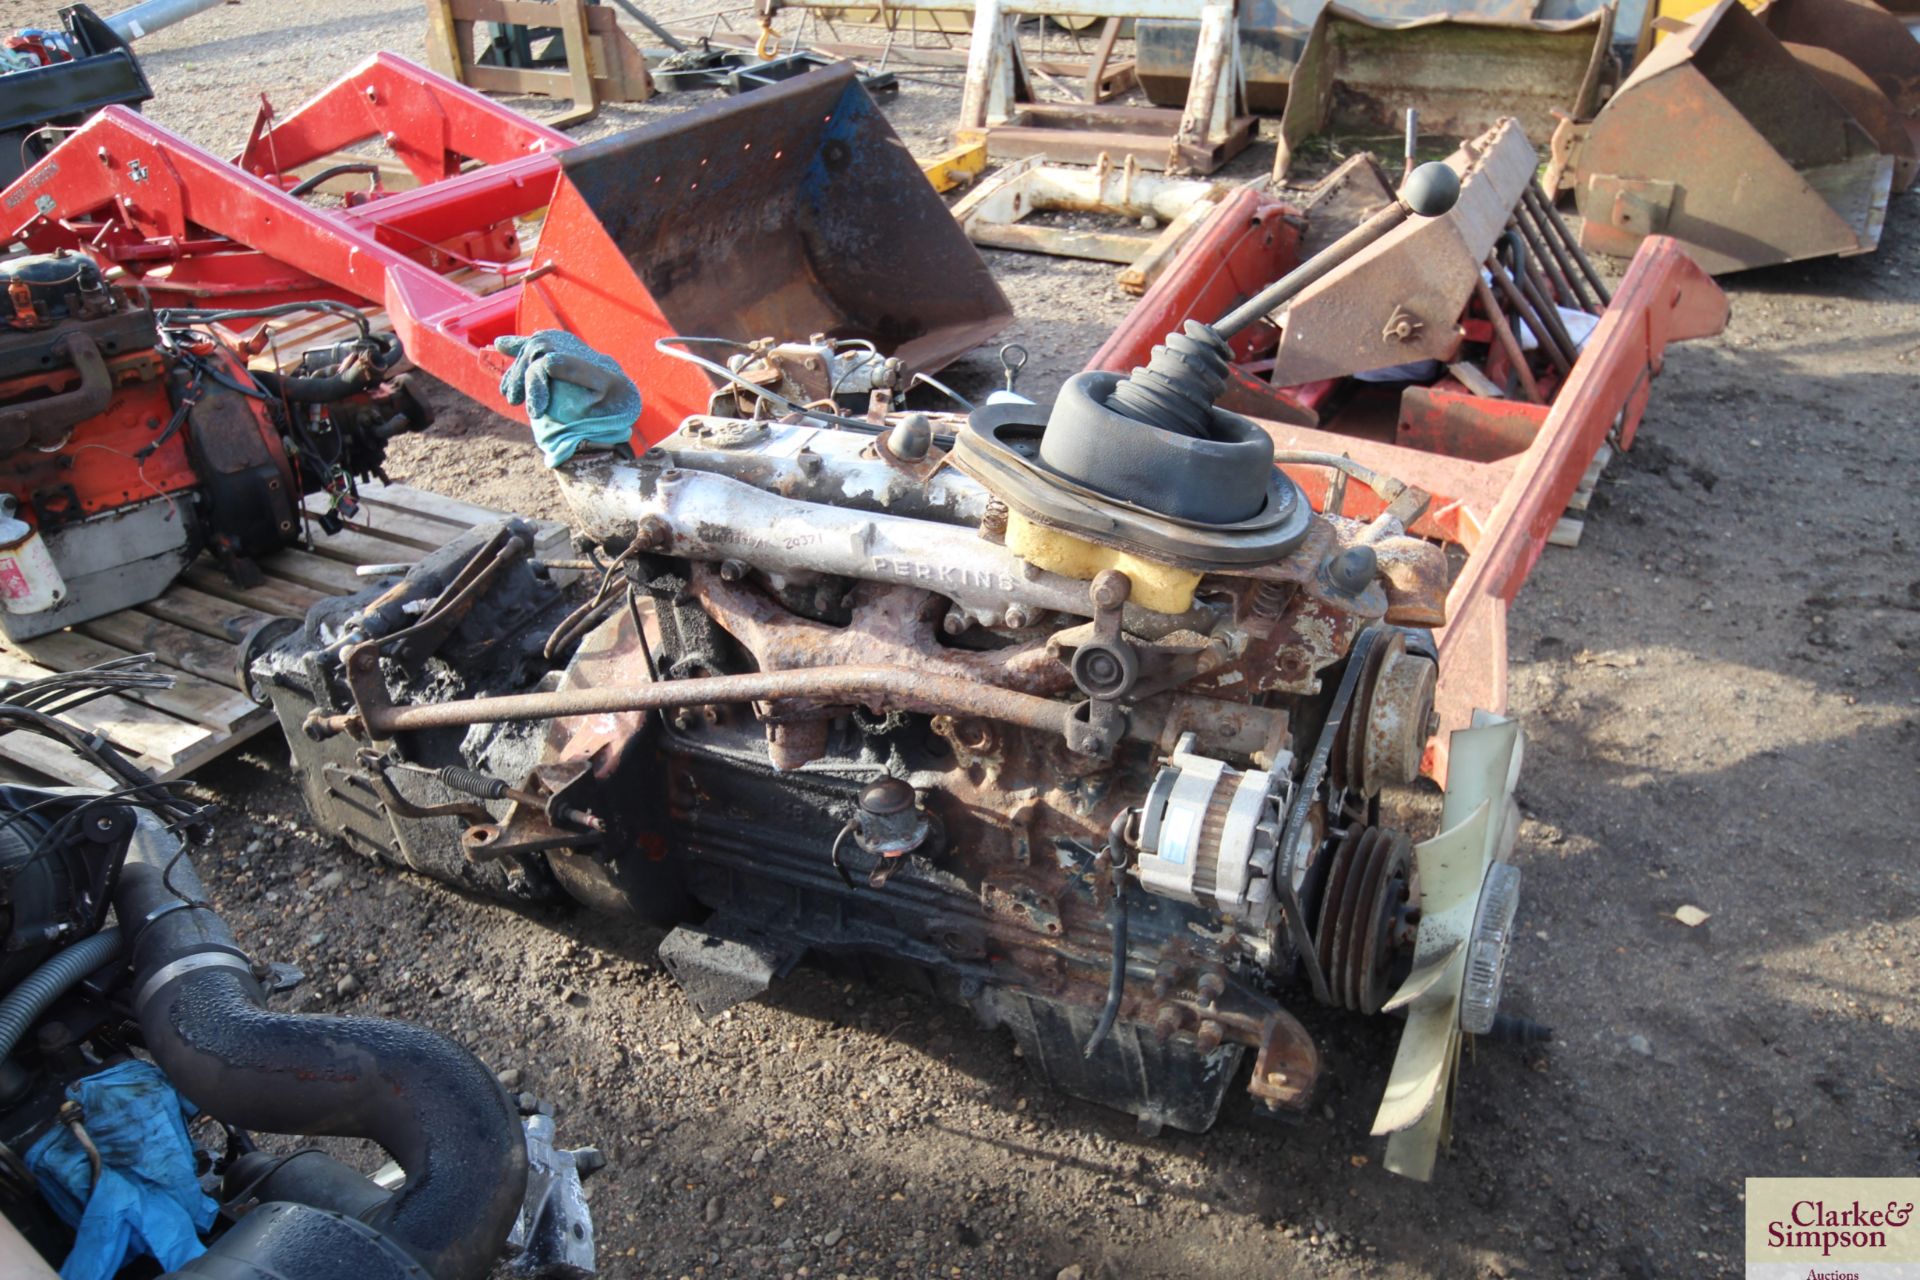 Perkins dot4 6cyl engine and gearbox. V